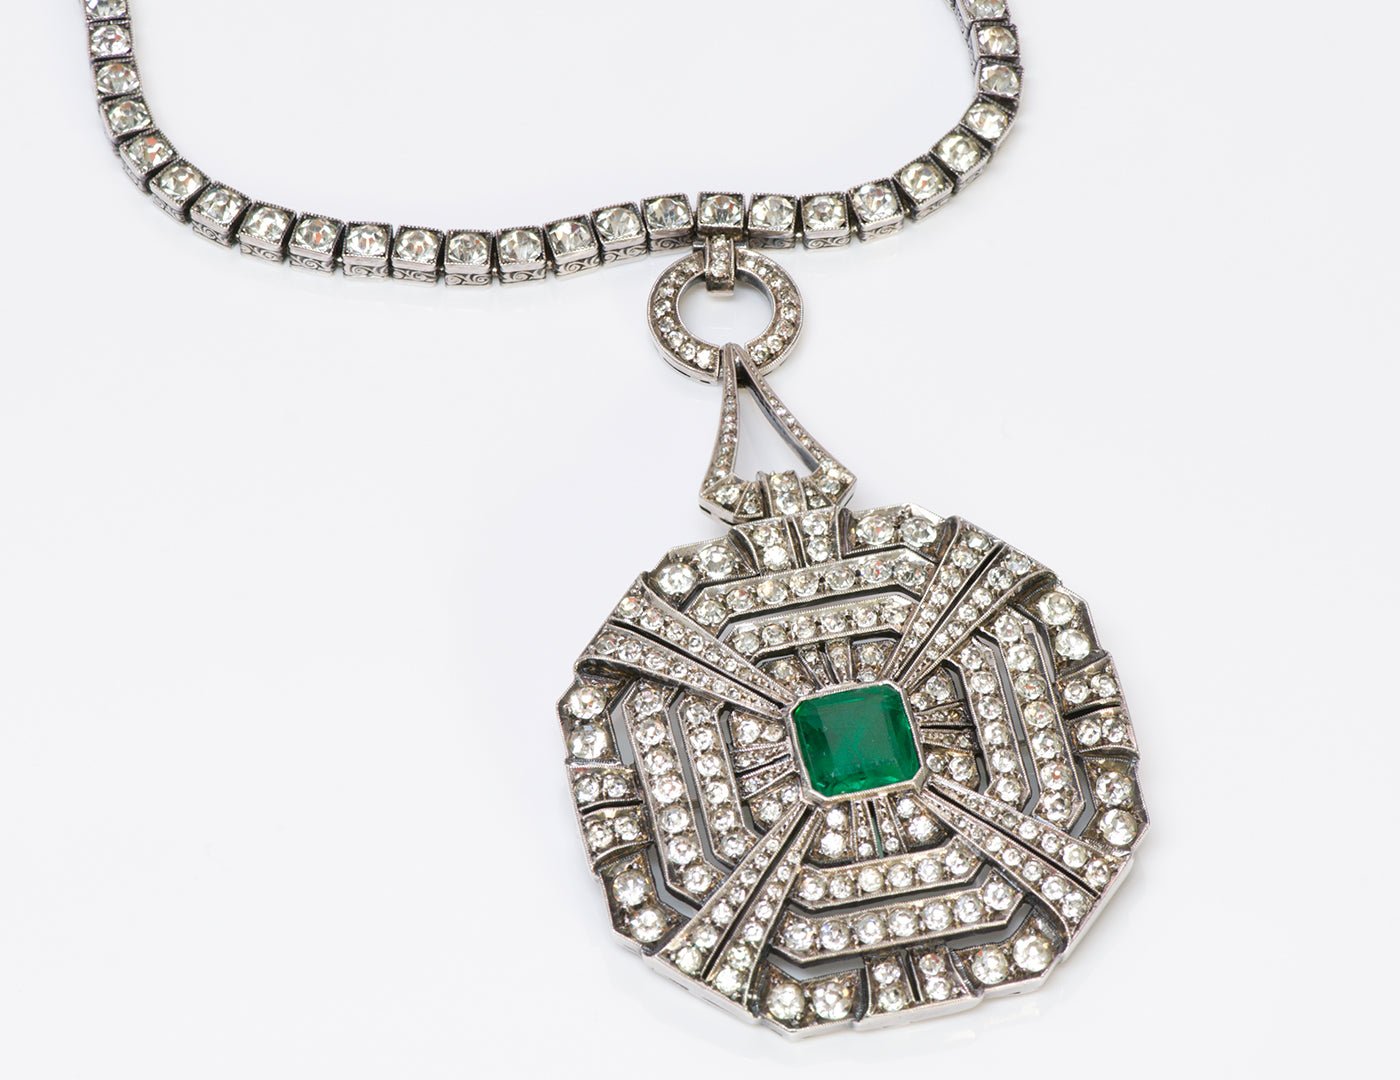 Art Deco 935 Sterling Silver Faux Emerald Paste Pendant Necklace/Brooch - DSF Antique Jewelry